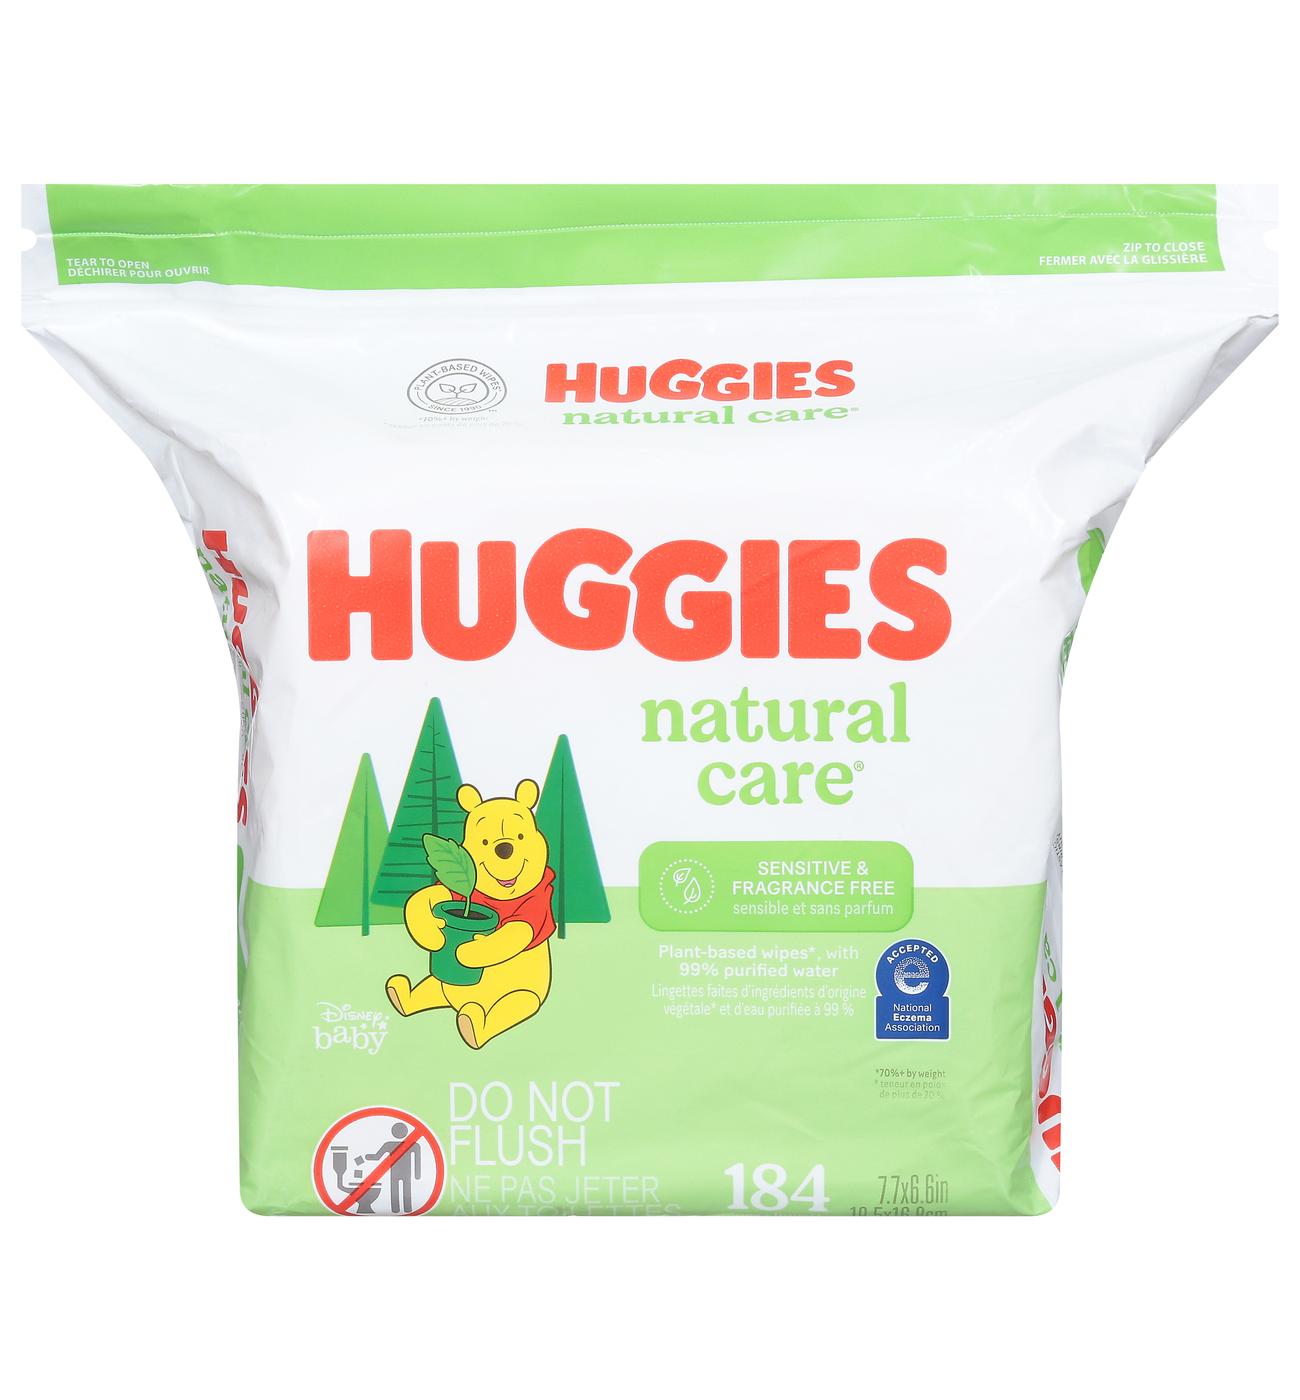 Huggies Natural Care Sensitive Baby Wipes - Fragrance Free; image 1 of 3